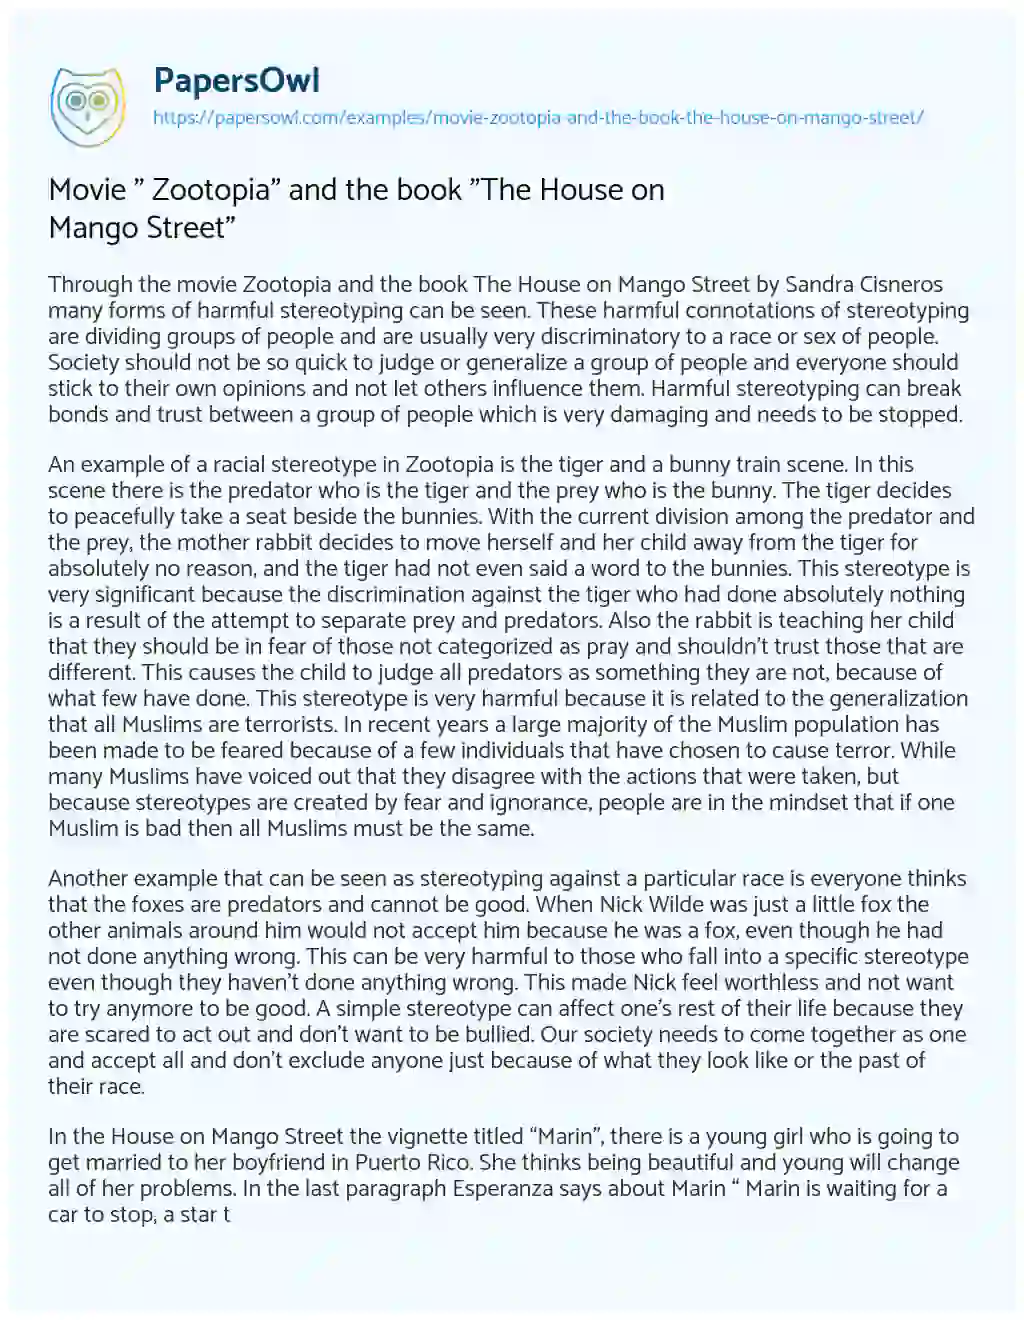 Movie ” Zootopia” and the Book “The House on Mango Street” essay